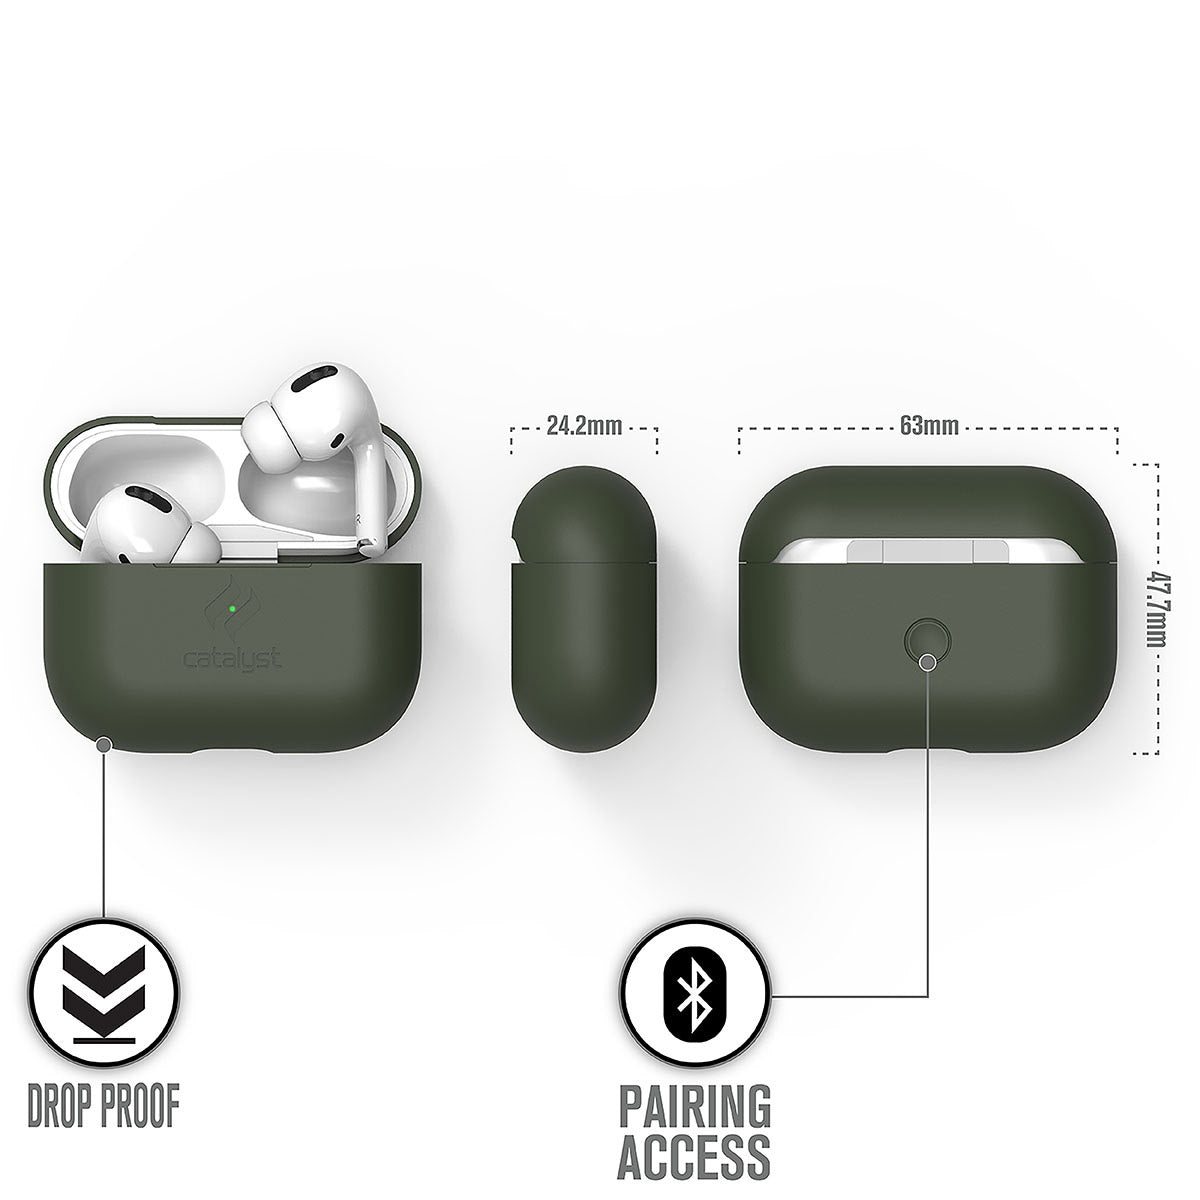 Catalyst airpods pro gen 2/1 slim case showing the case dimensions in a army green colorway text reads drop proof pairing access